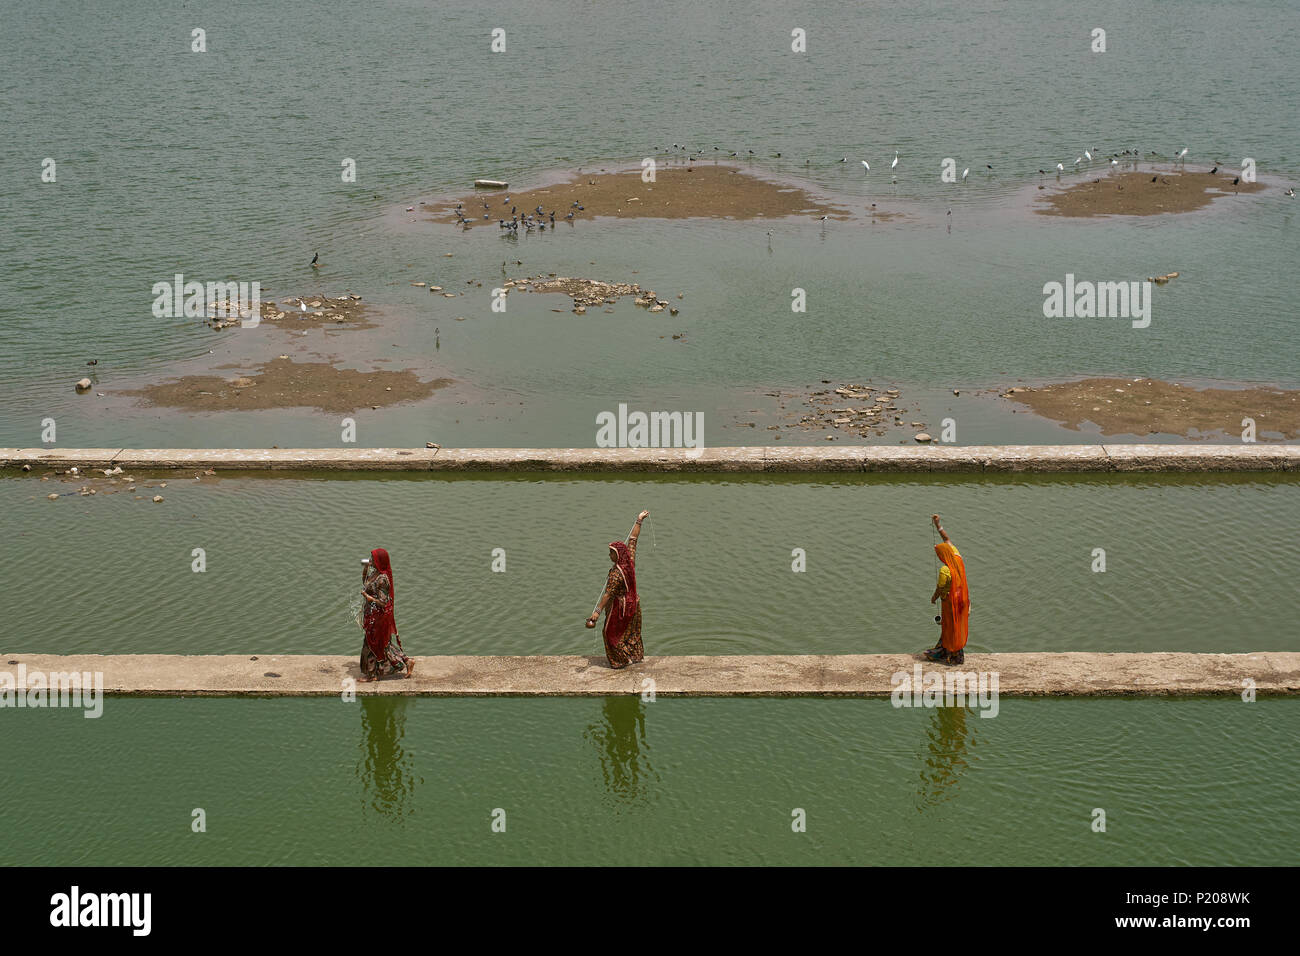 Three Indian women walking on a stone bridge over water while preforming a ritual. Stock Photo